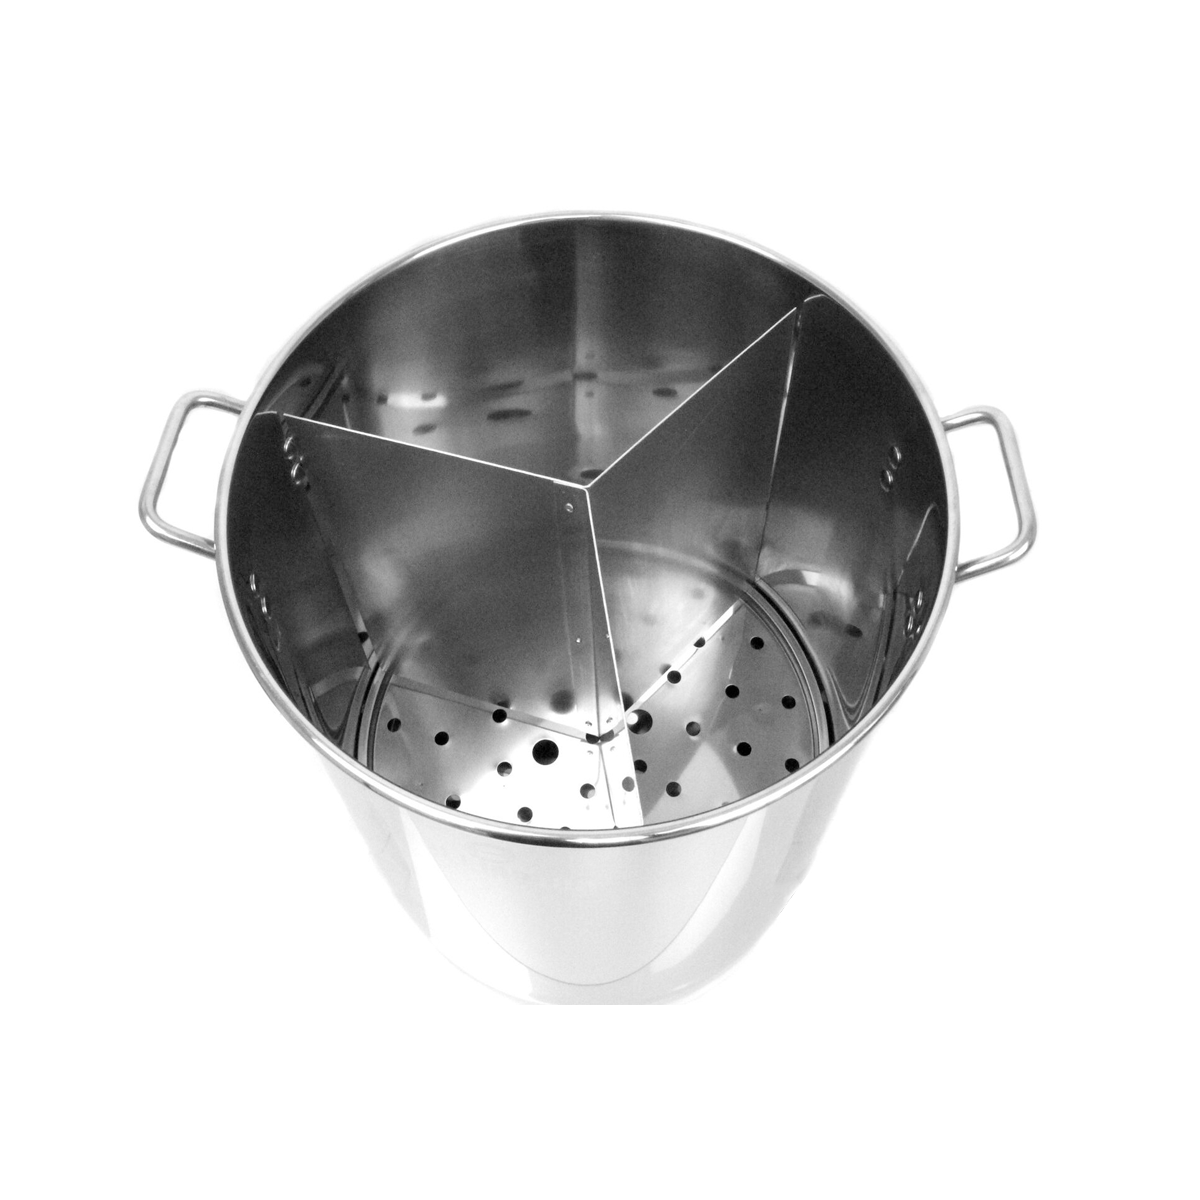 High Quality Stainless Steel 8 Qt. Steamer Stockpot Tamale Steam Pot 